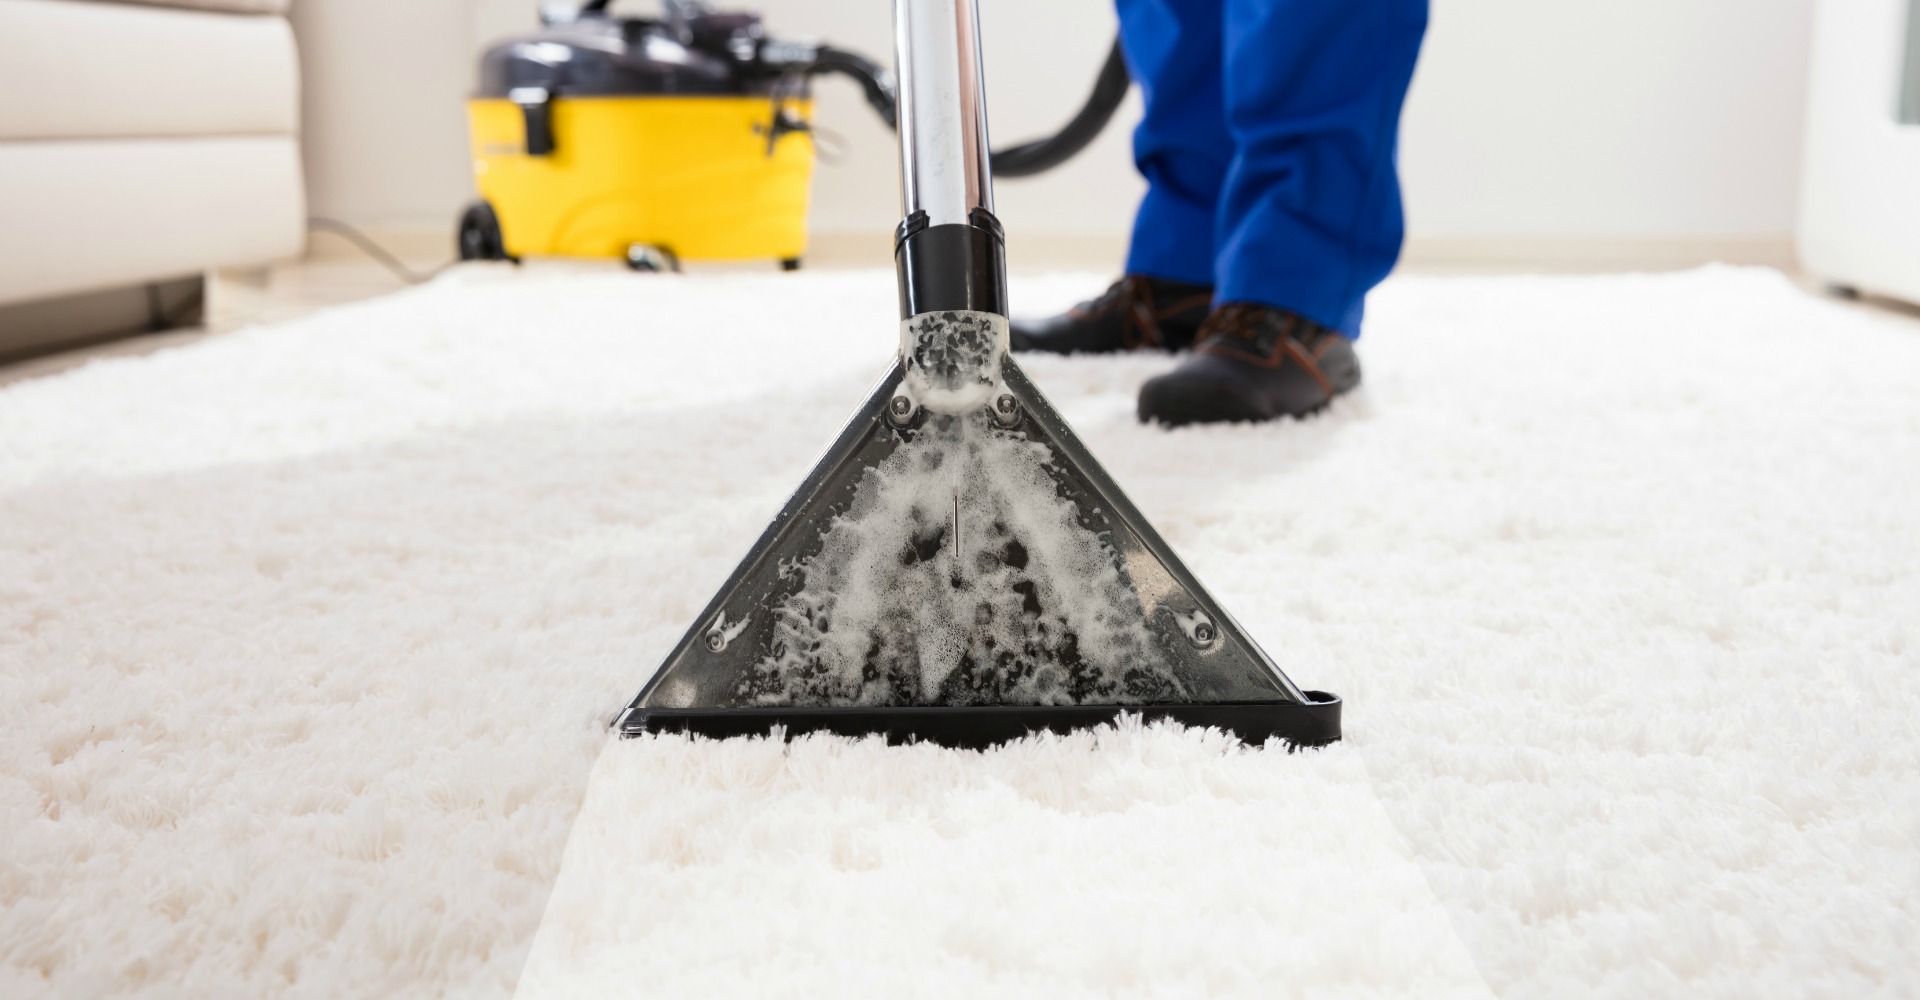 A person using a carpet cleaning powder